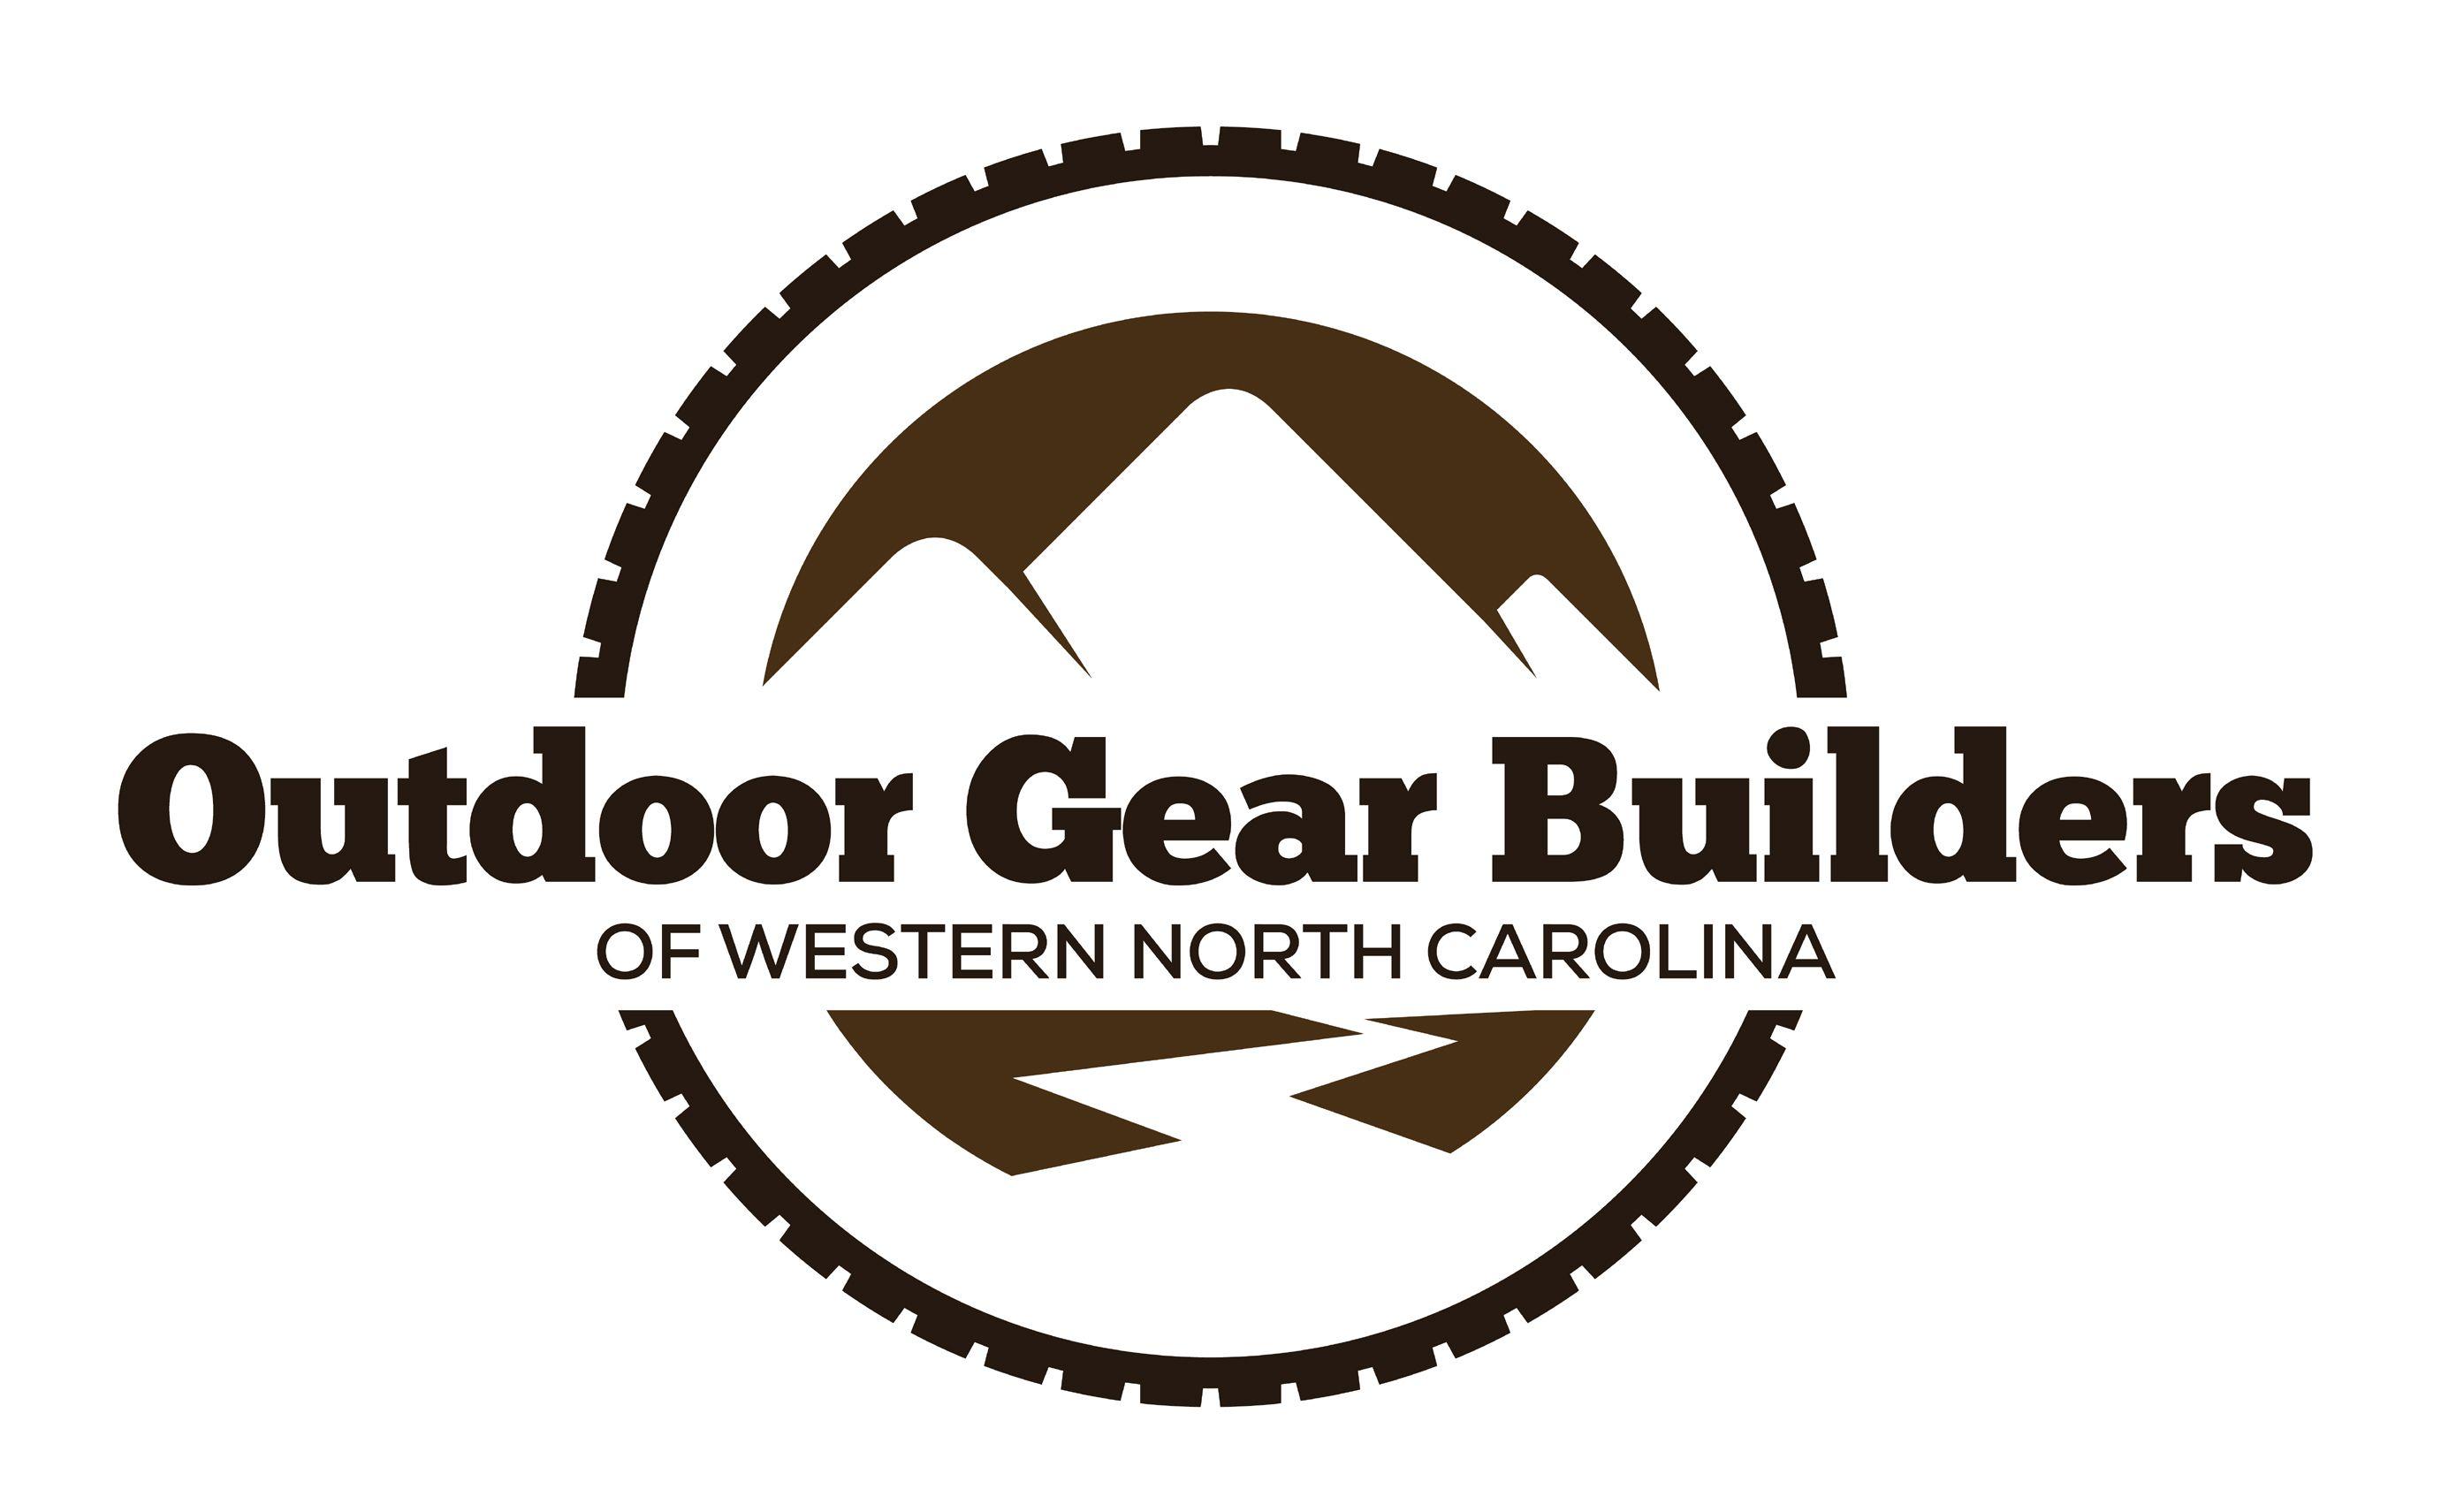 Outdoor Clothing Company Logo - Outdoor Gear and Clothing Company Logos Traveling is fun | Hiking ...